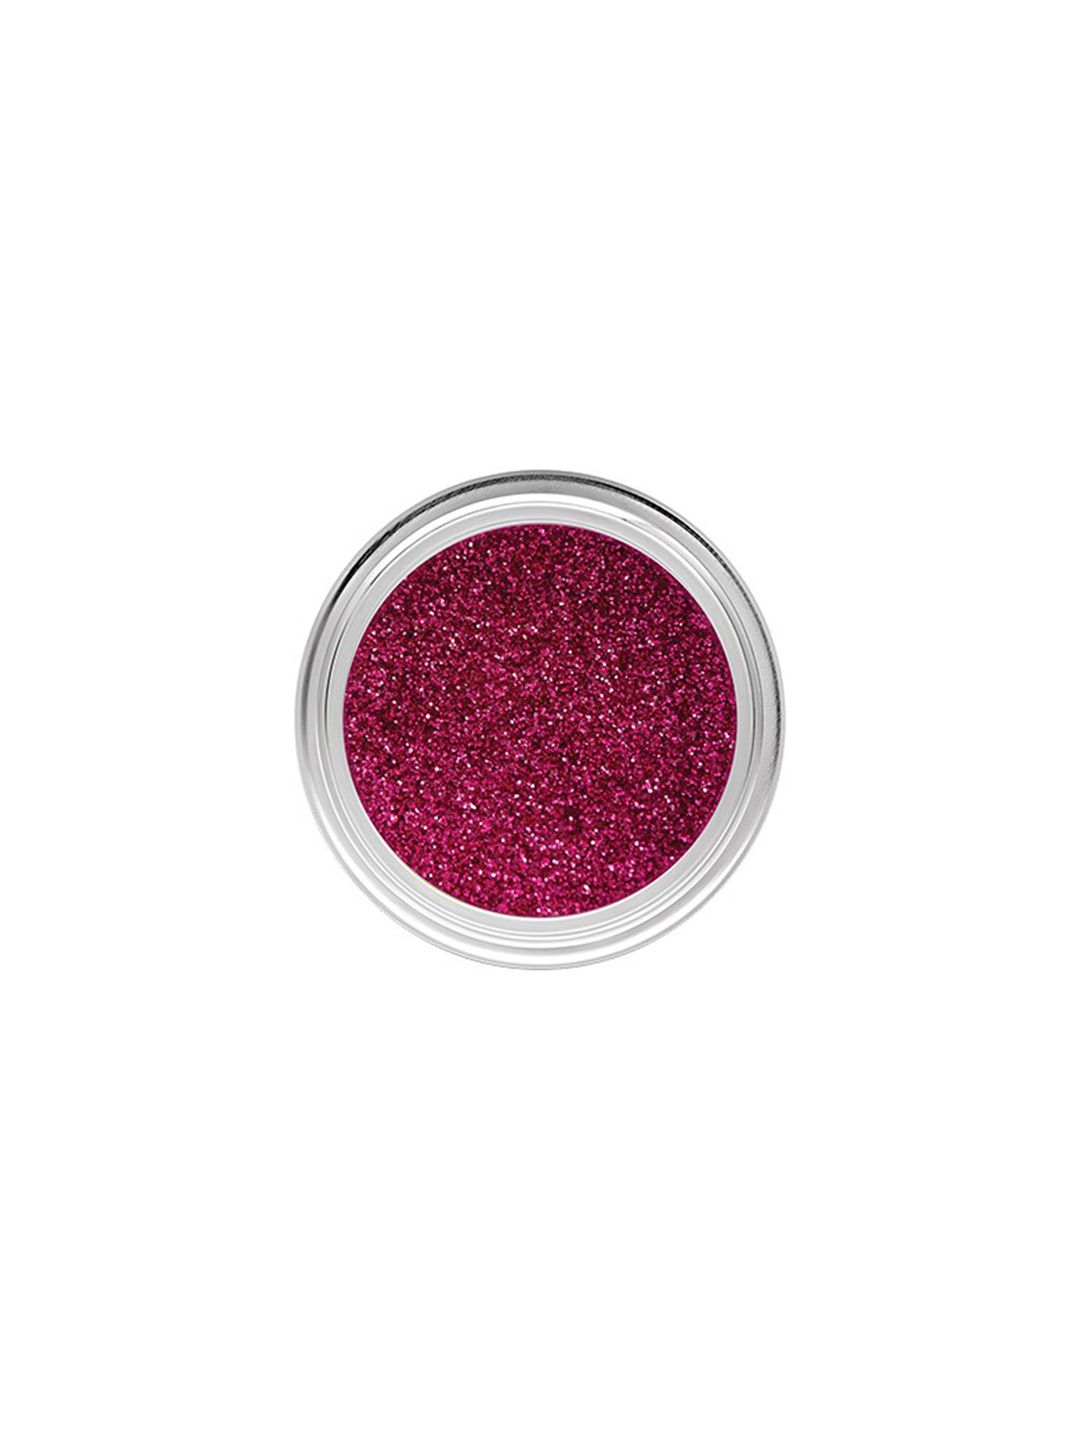 C2P PROFESSIONAL MAKEUP Uptown Loose Glitters Eyeshadow - Catwalk 44 Price in India